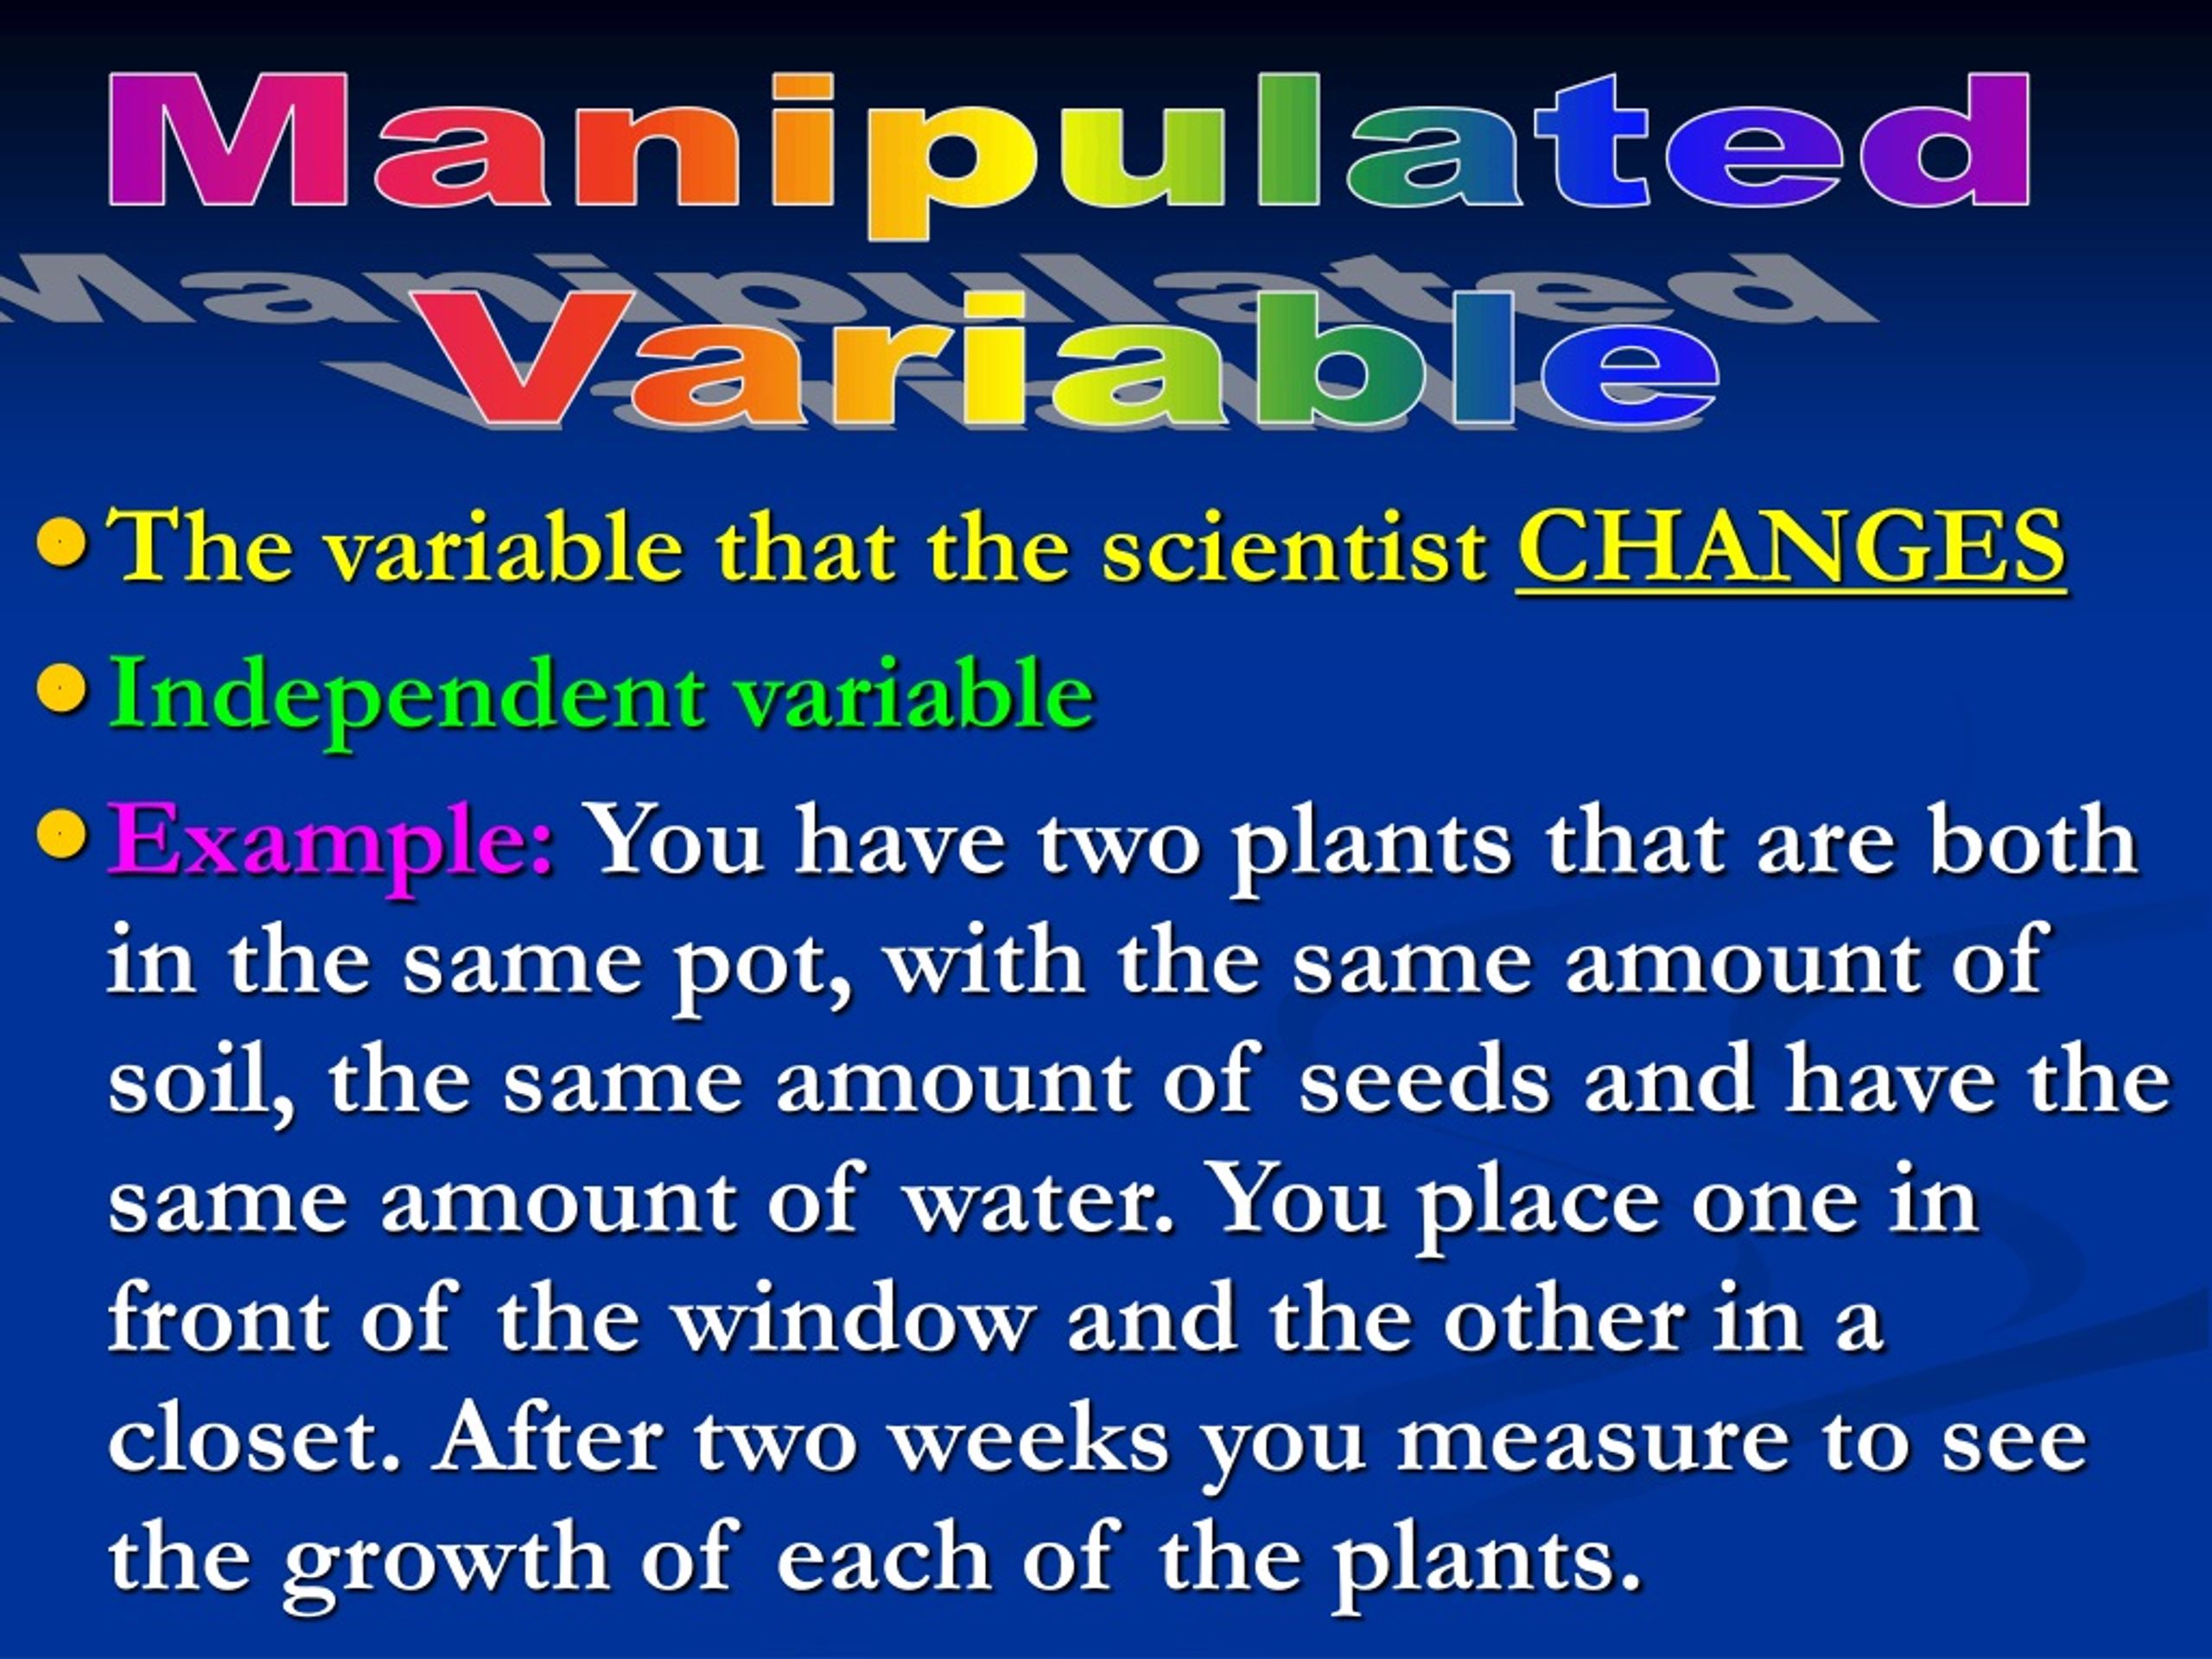 a variable is manipulated in ____ research